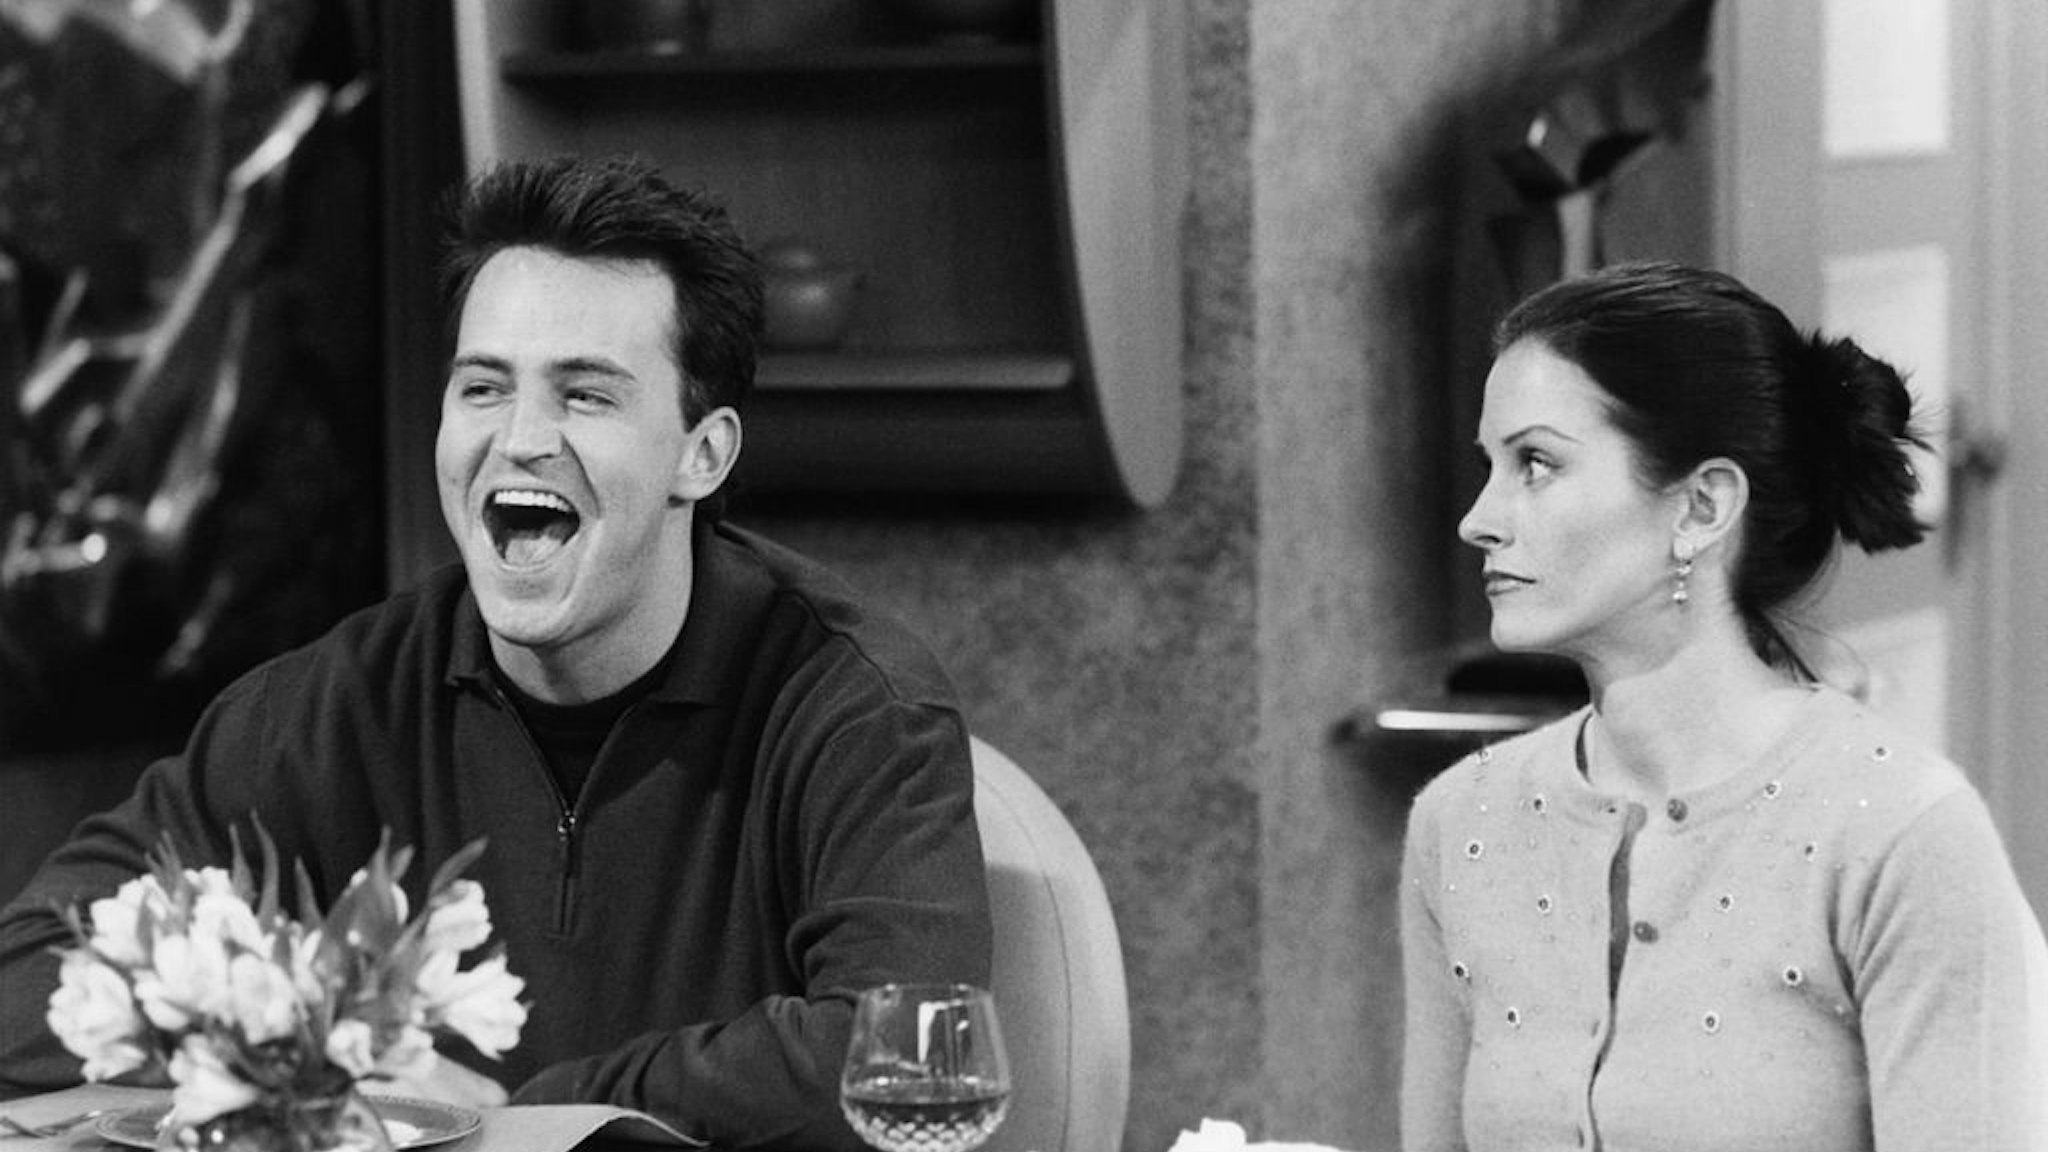 FRIENDS -- "The One with Chandler's Work Laugh" Episode 12 -- Air Date 01/21/1999 -- Pictured: (l-r) Matthew Perry as Chandler Bing, Courteney Cox as Monica Geller (Photo by NBCU Photo Bank/NBCUniversal via Getty Images via Getty Images)